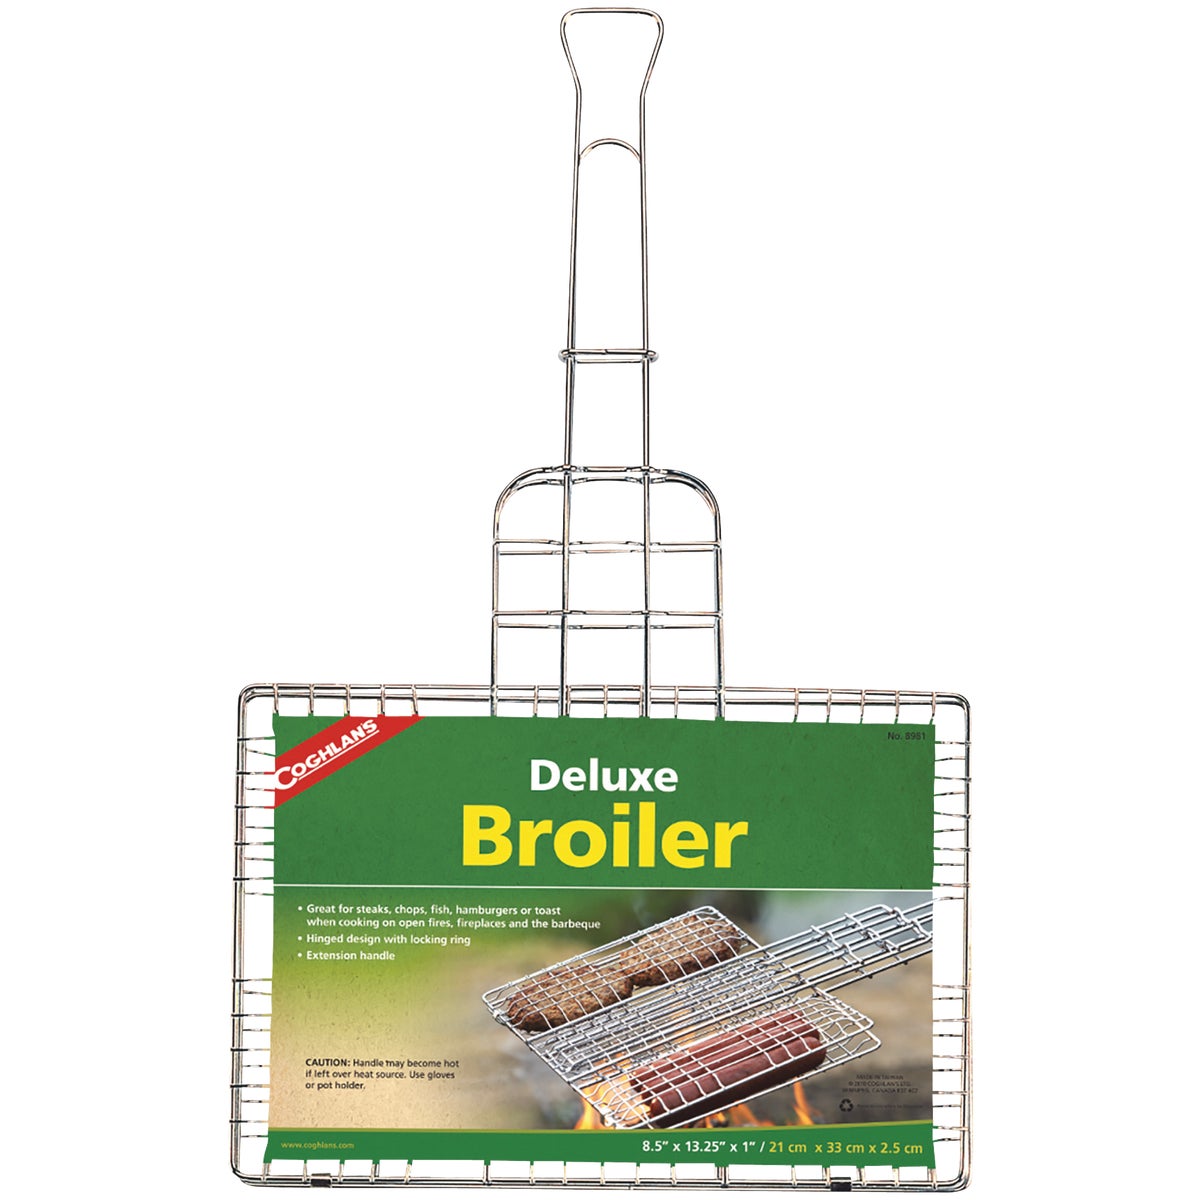 Item 800554, Chrome-plated metal deluxe broiler.